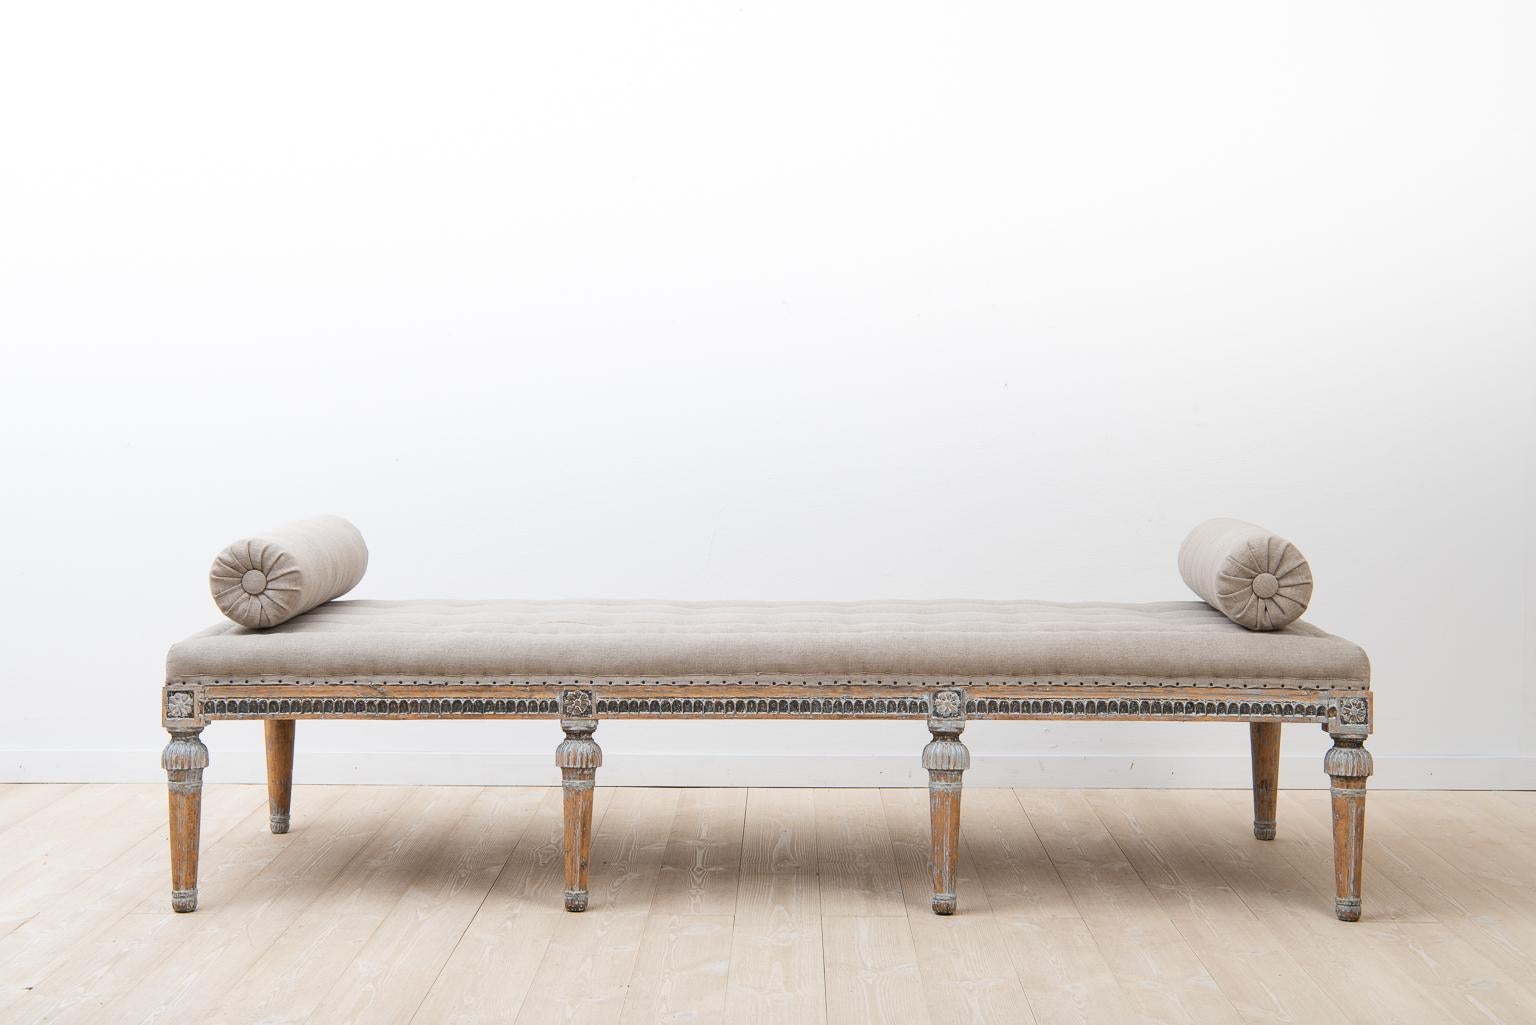 Swedish bench in Gustavian style manufactured around year 1800. The surface is dry scraped to traces of the original paint. The seat is renovated with handmade padding in natural materials, done according to old traditions. It has also been